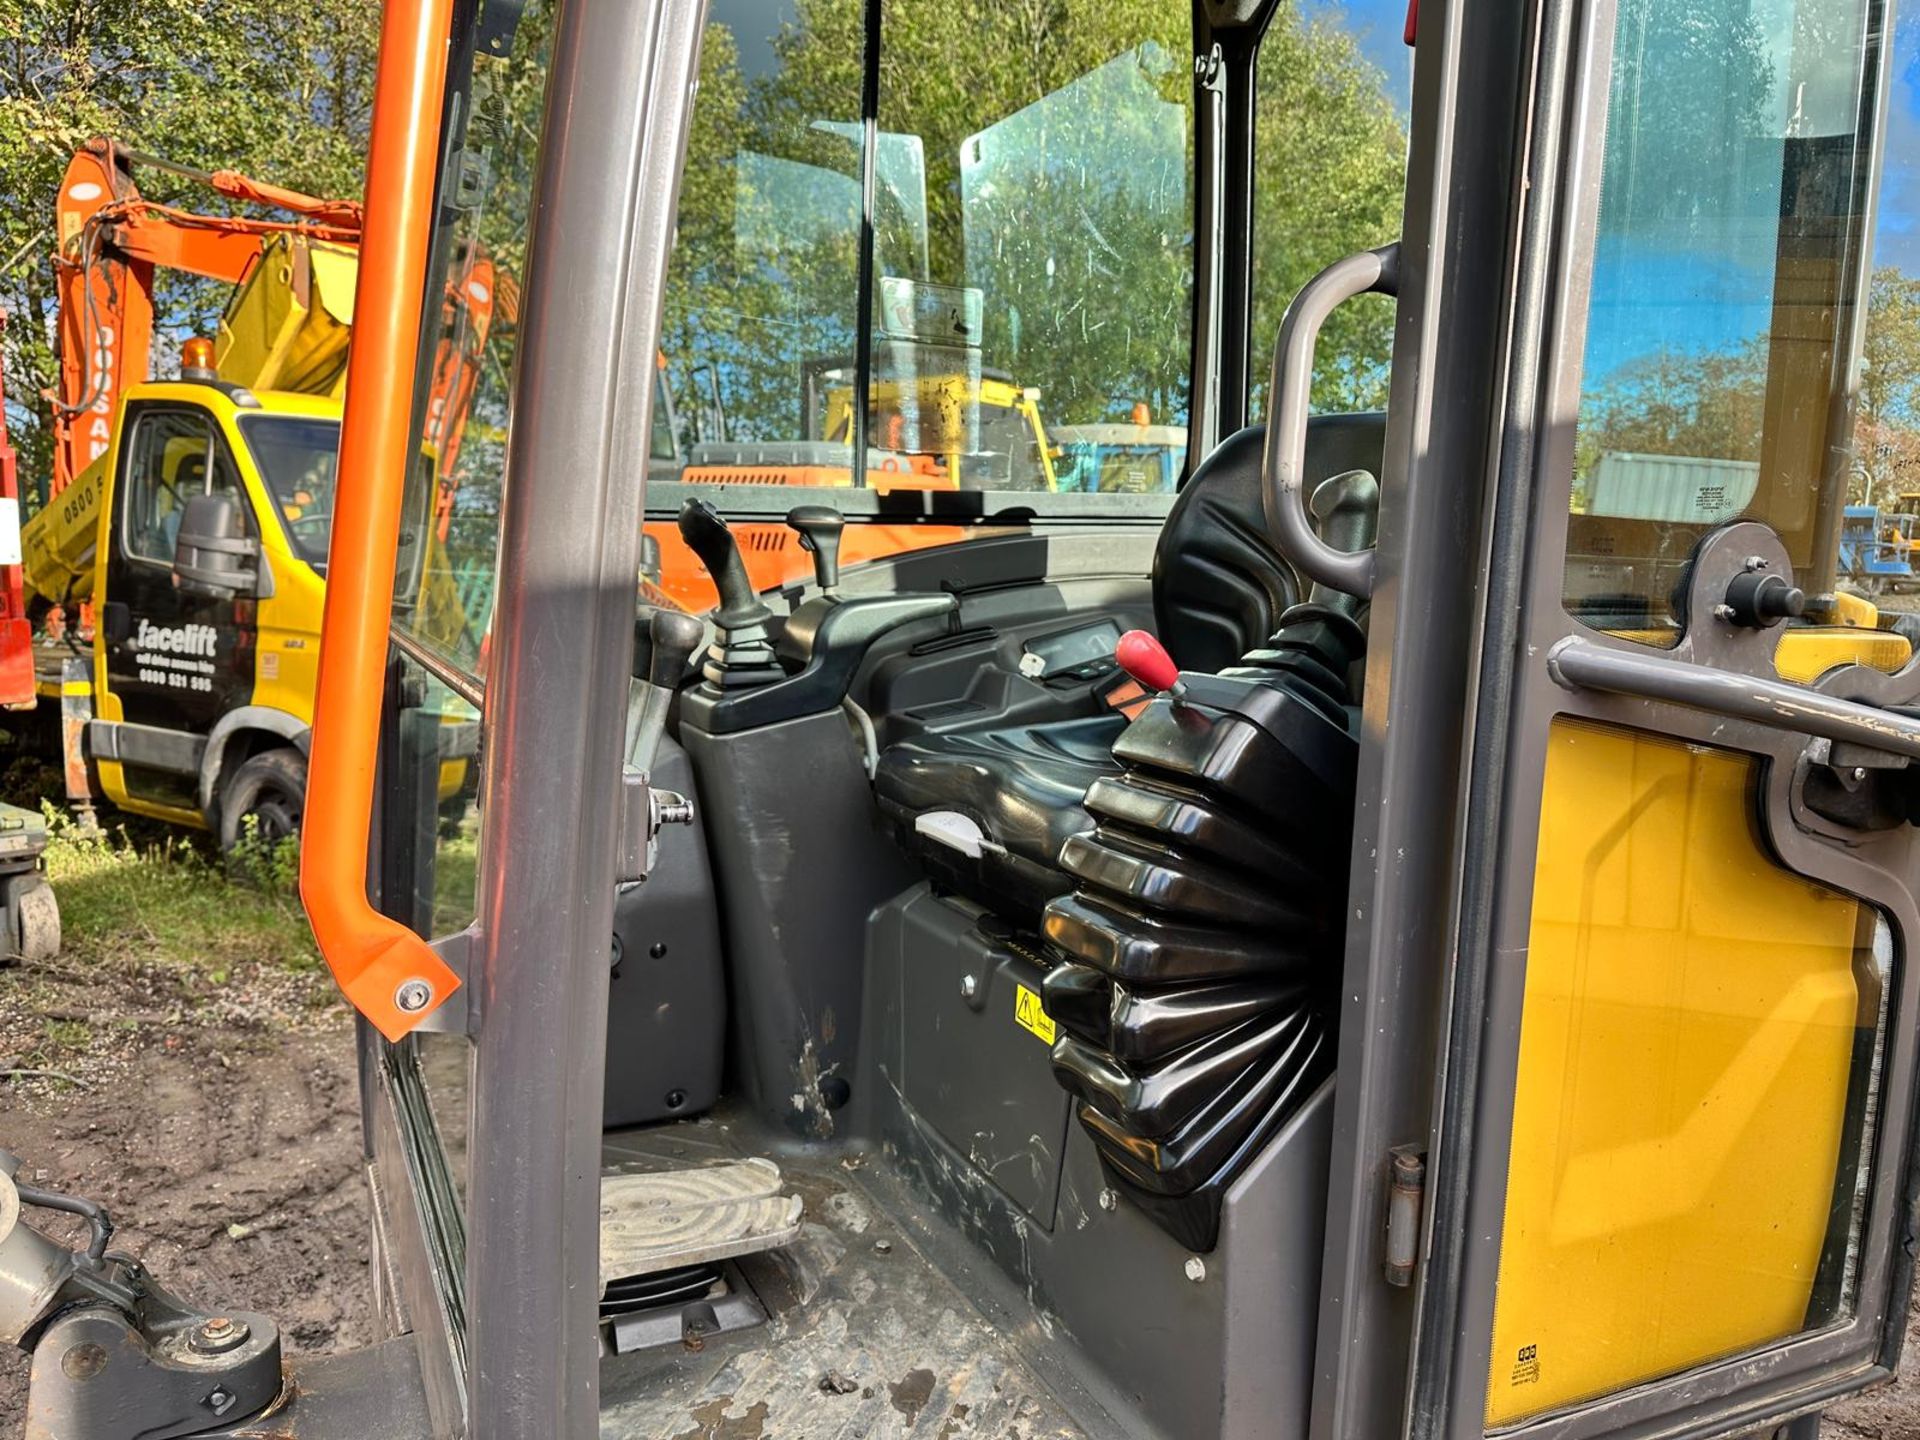 2018 VOLVO EC18E MINI EXCAVATOR - RUNS DRIVES AND WORKS WELL - SHOWING A LOW 1801 HOURS!  - Image 8 of 21